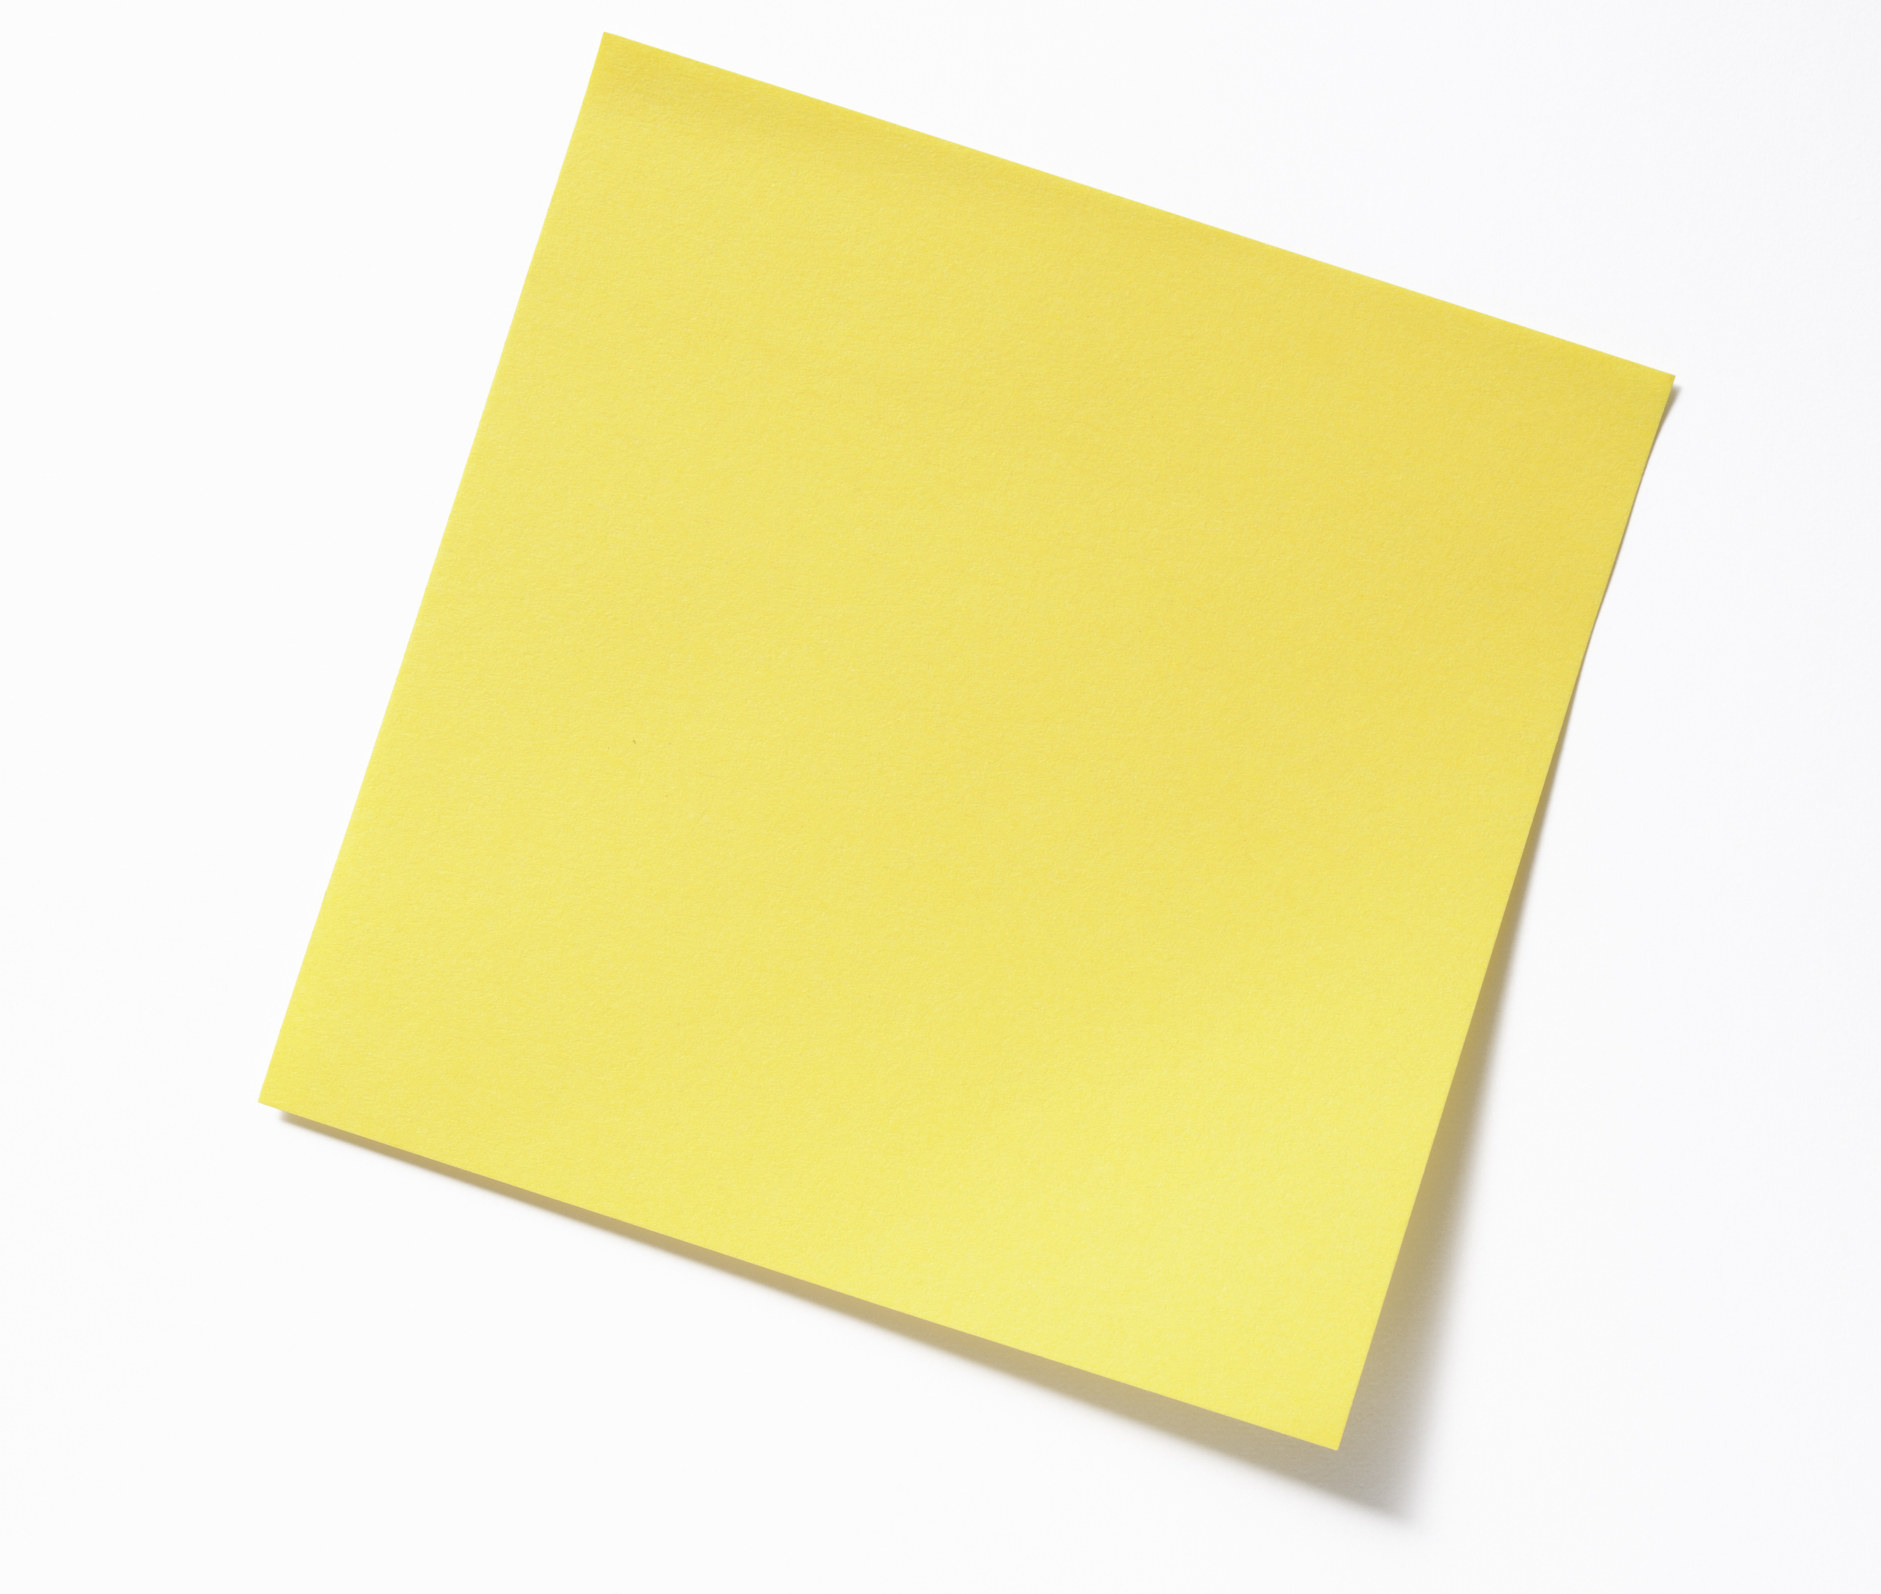 A yellow sticky note